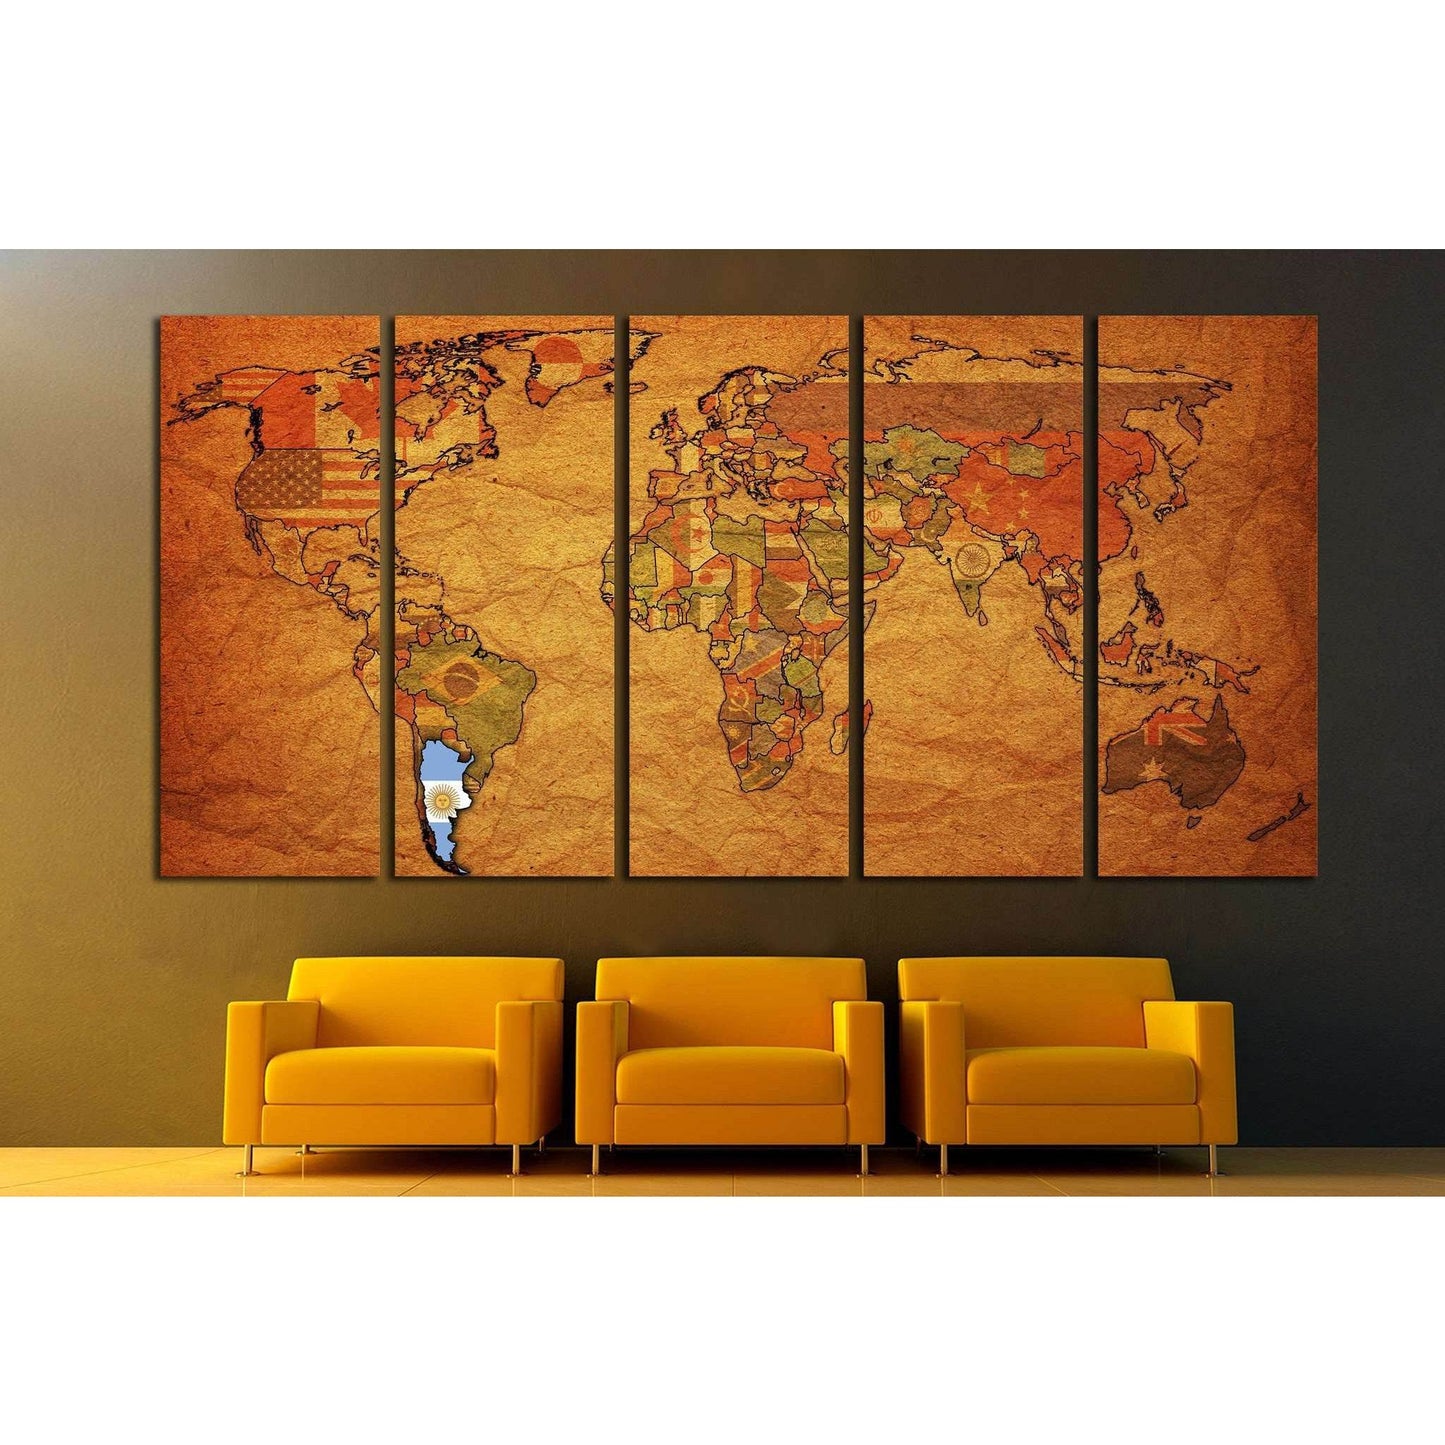 Grunge Political World Map Canvas PrintDecorate your walls with a stunning Grunge map Canvas Art Print from the world's largest art gallery. Choose from thousands of Map artworks with various sizing options. Choose your perfect art print to complete your